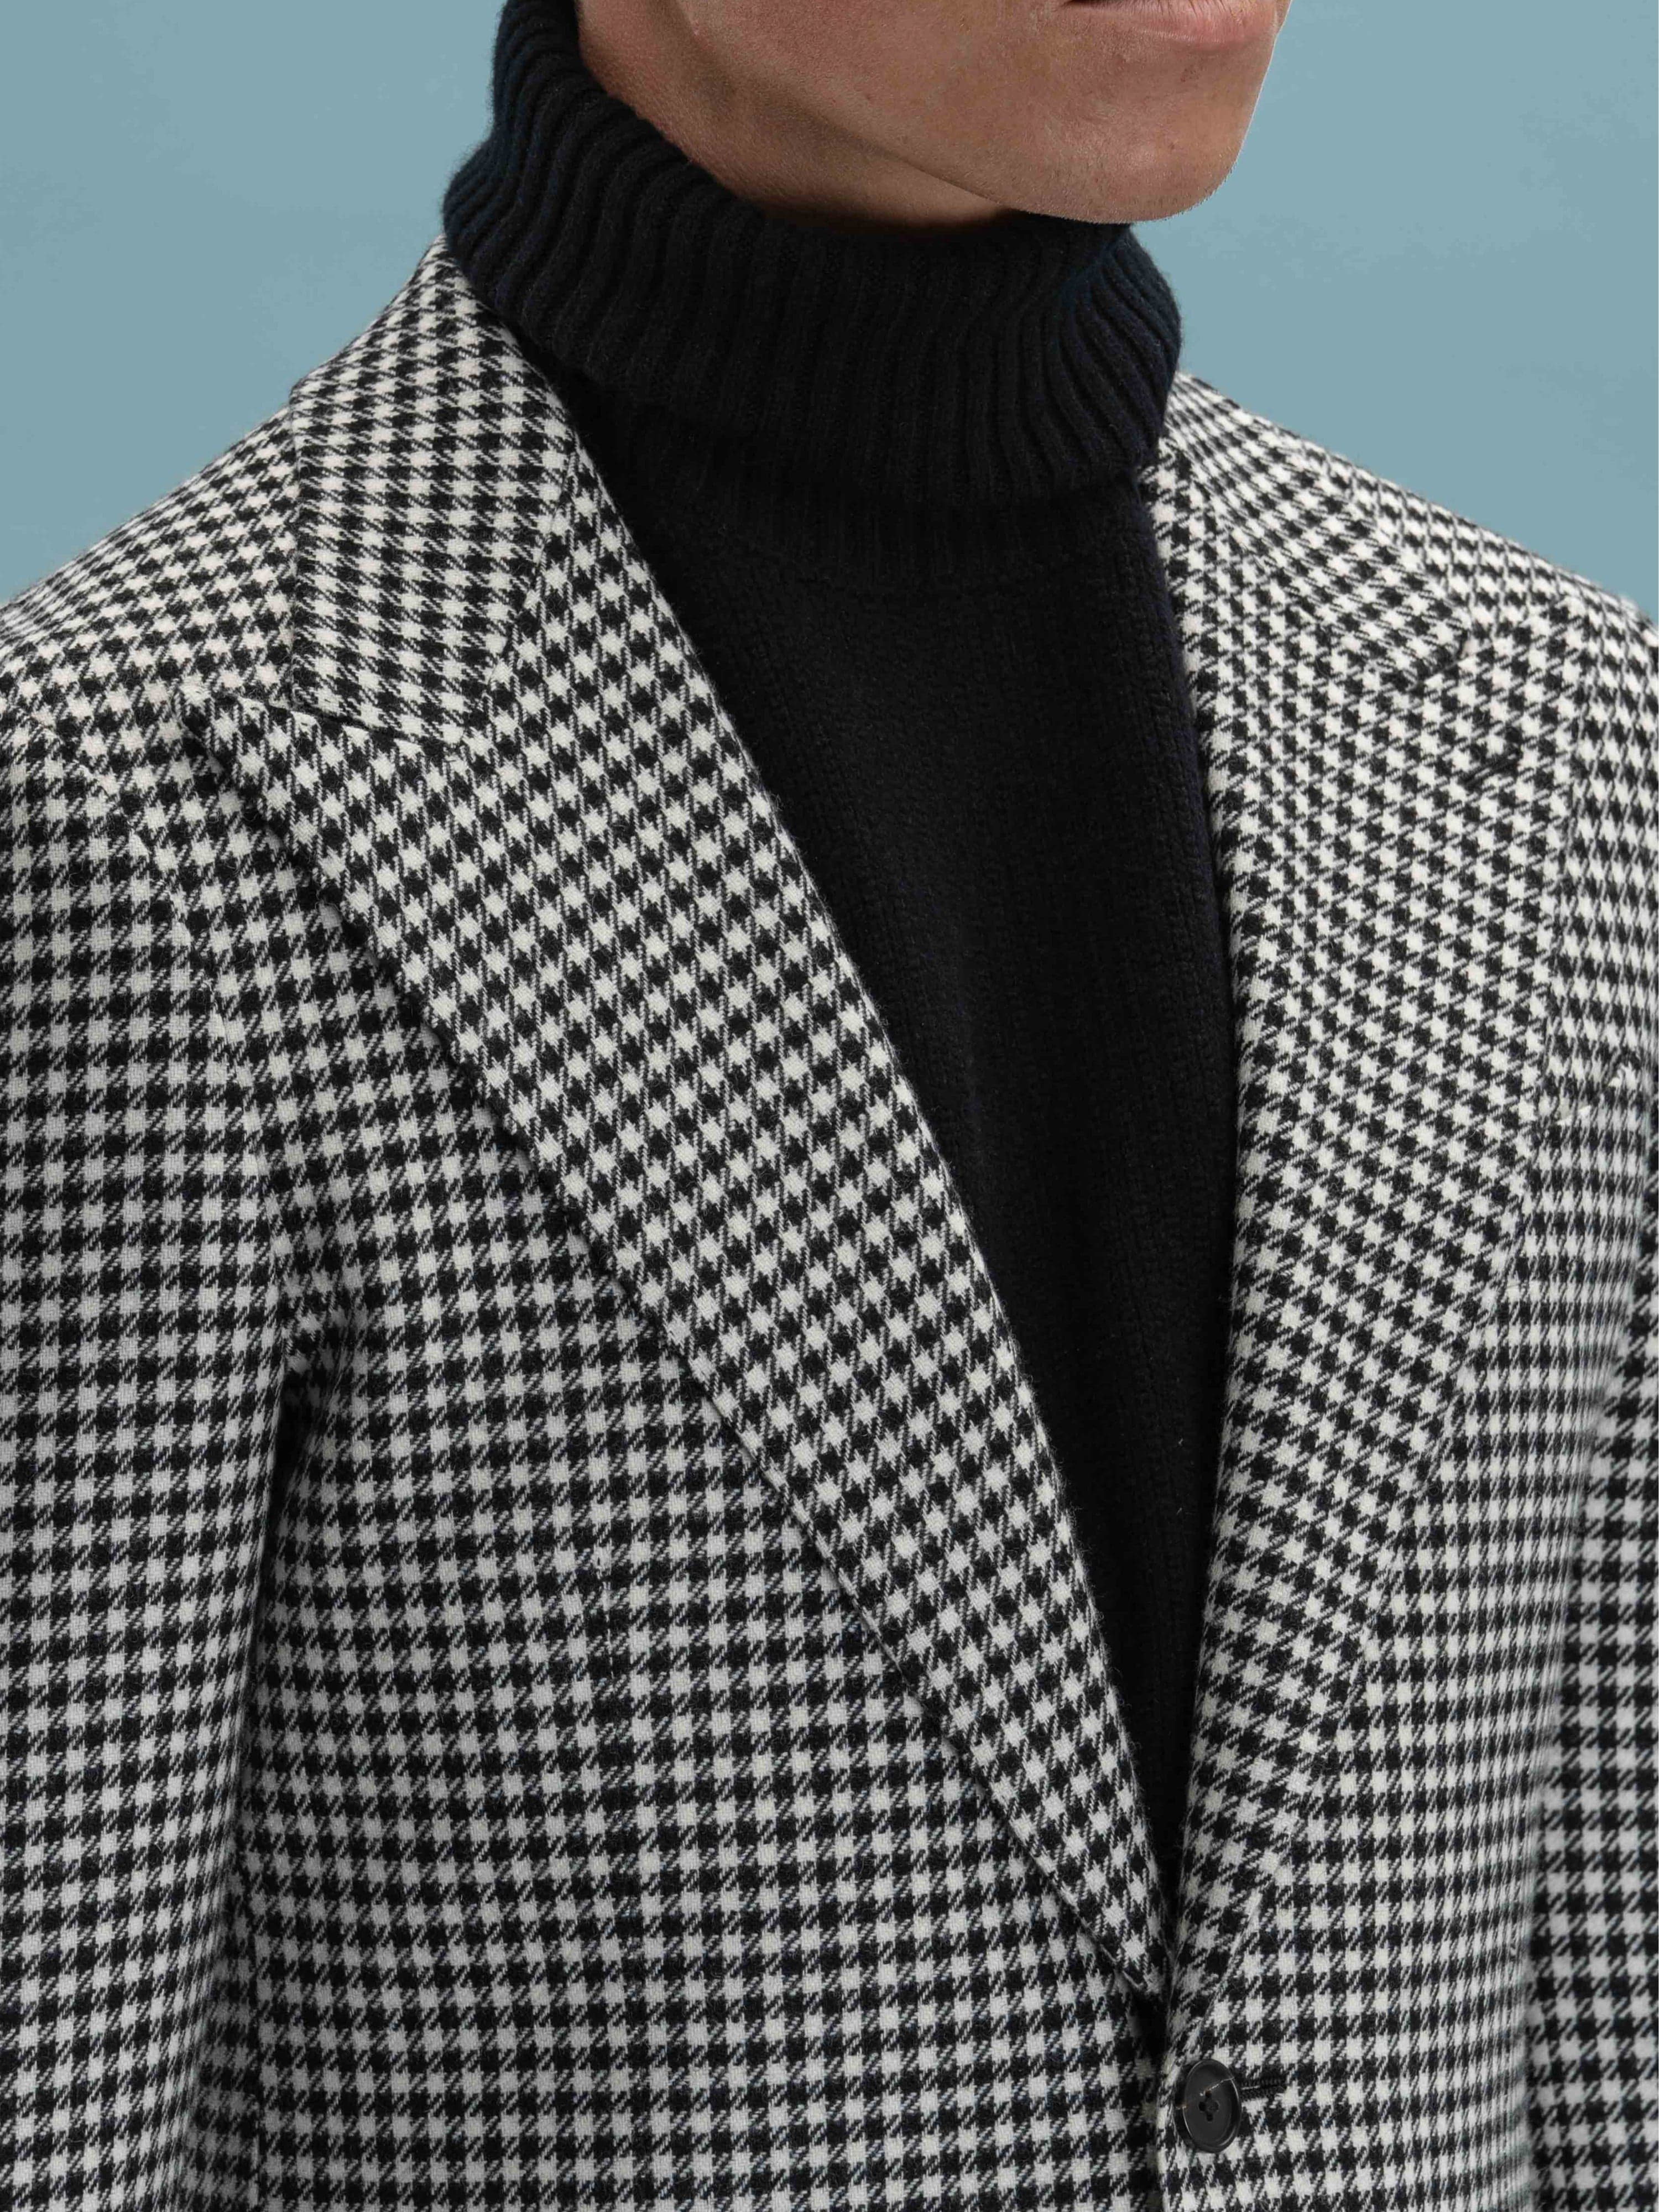 Houndstooth Lambswool Jacket - Grand Le Mar